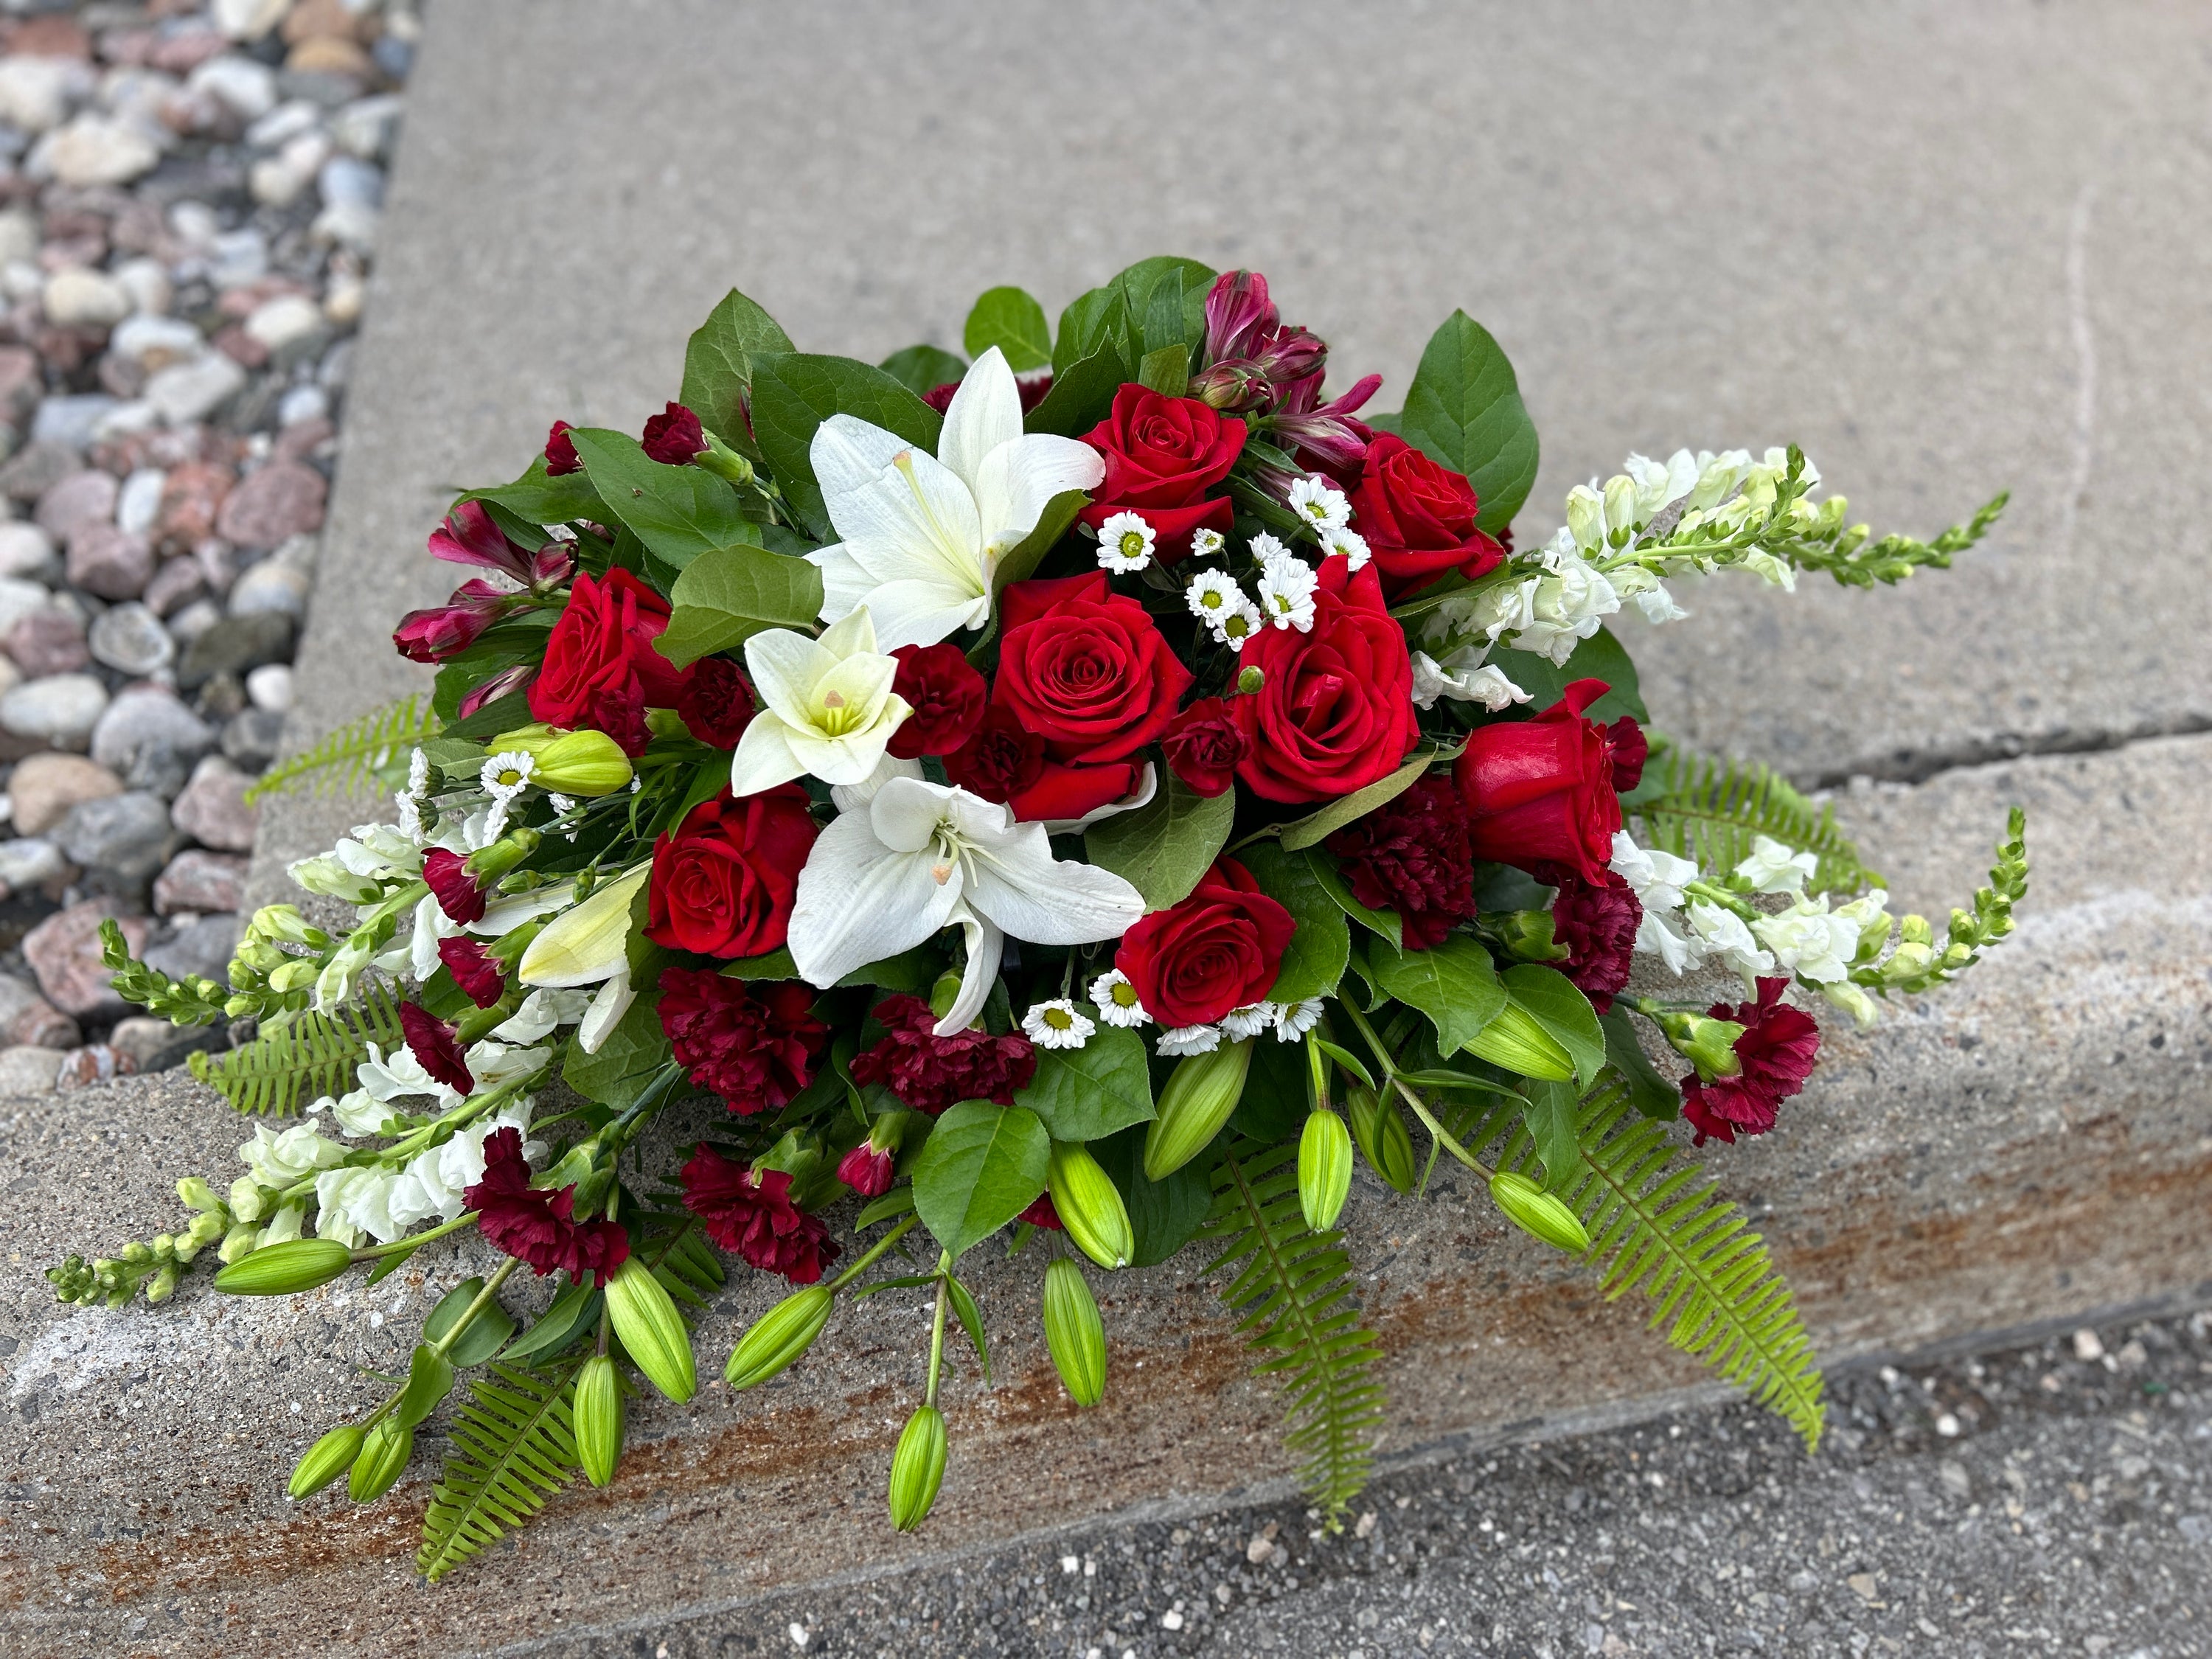 Share Your Love Story with Personalized Bouquets